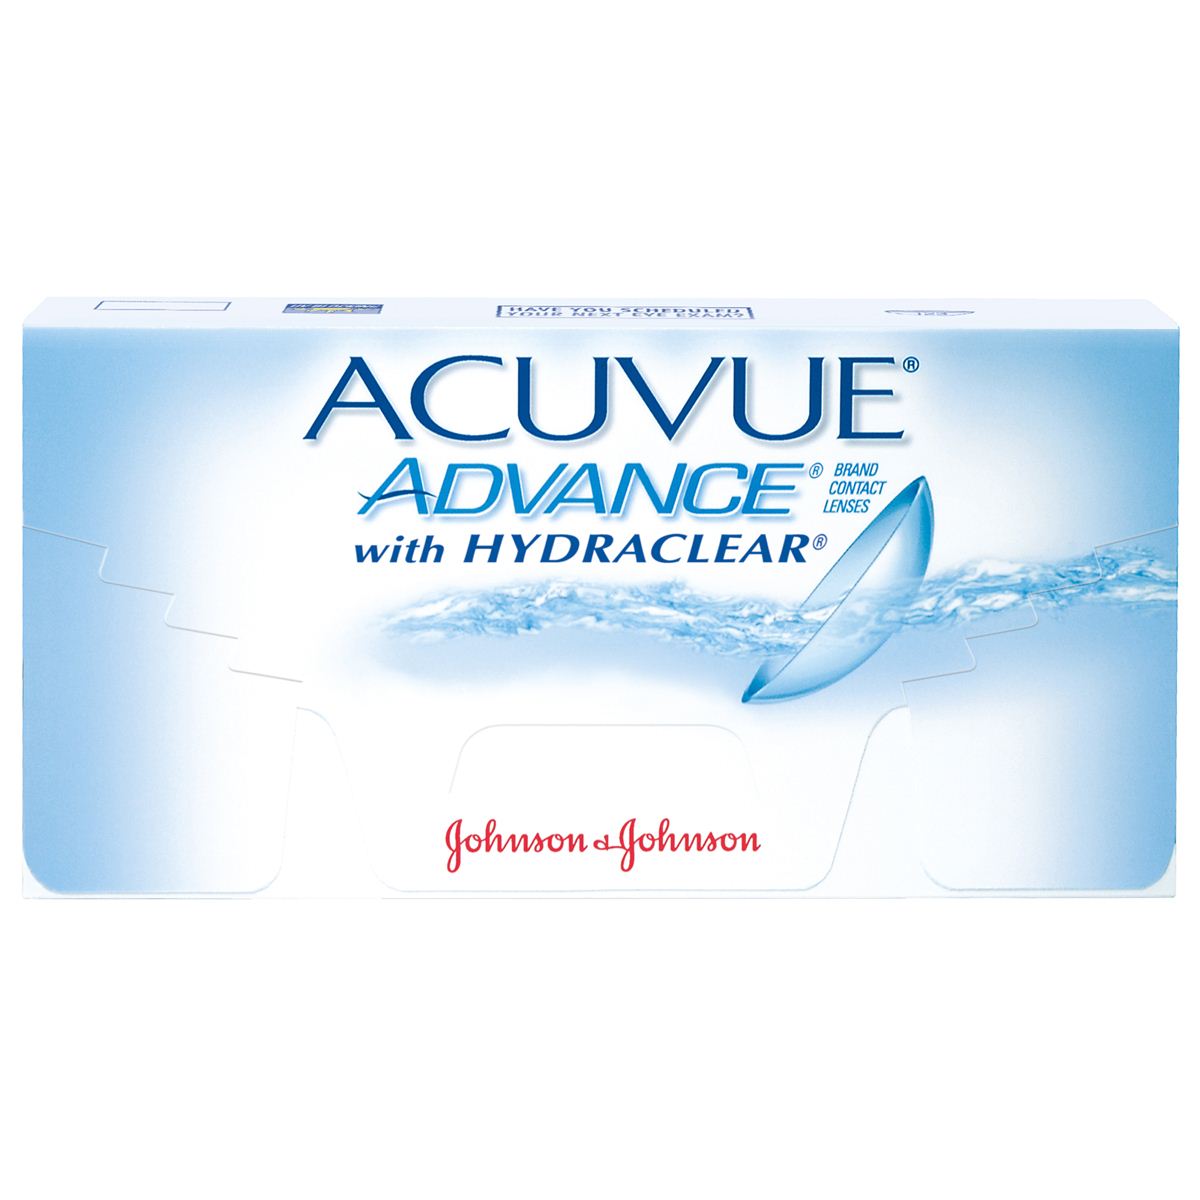 Acuvue Advance 8.7 14.0 -2.00